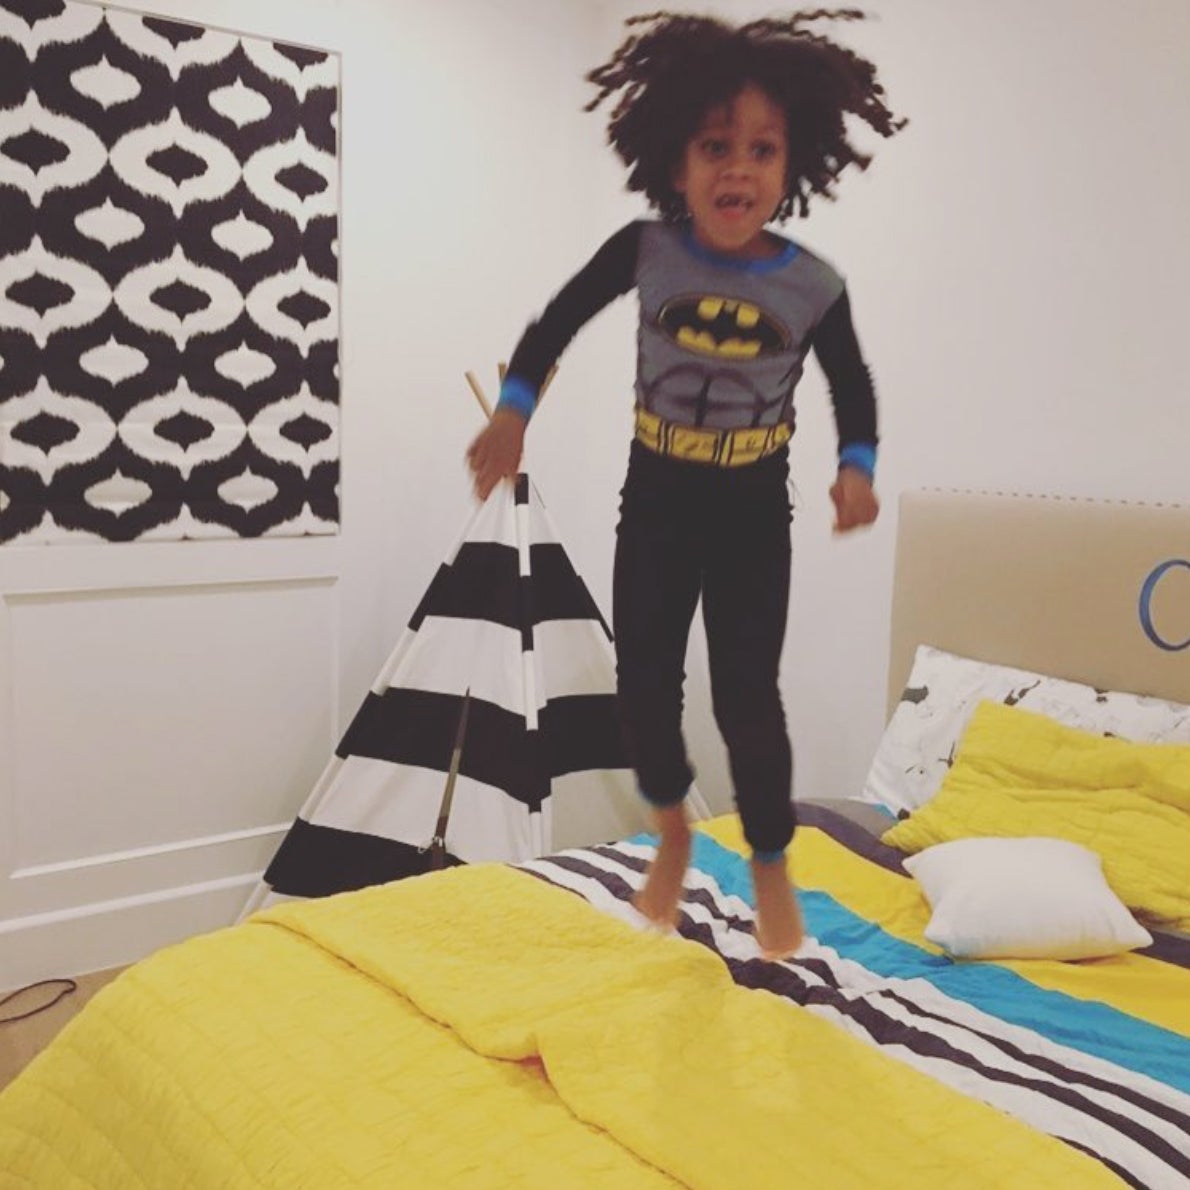 Proud Parents: In 2016 Celebrity Instagrams Were All About Their Adorable Mini-Mes
